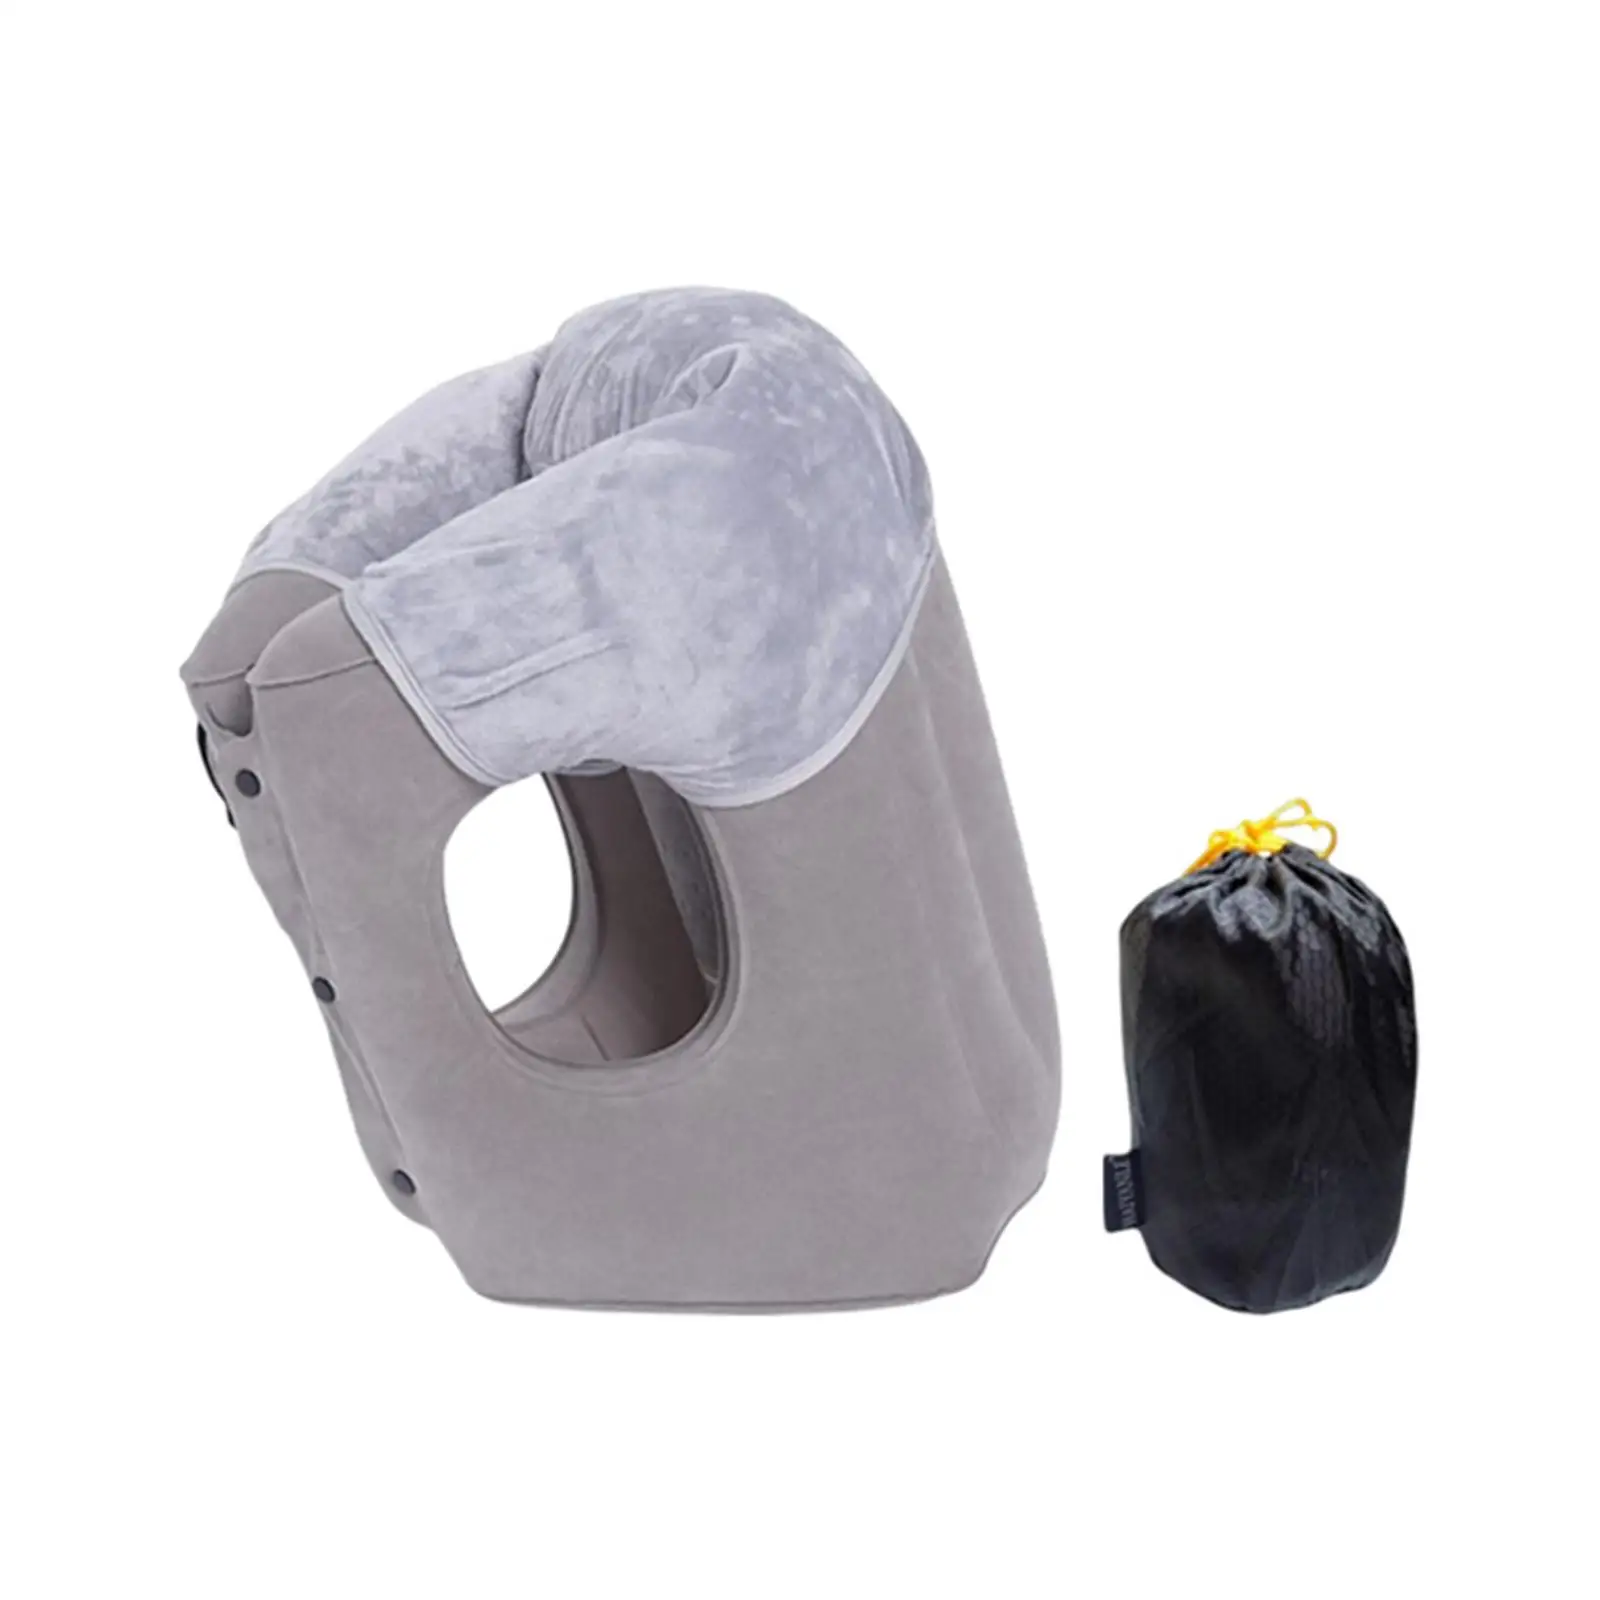 Inflatable Air Pillow Comfortably Support Head for Train Car Sleeping